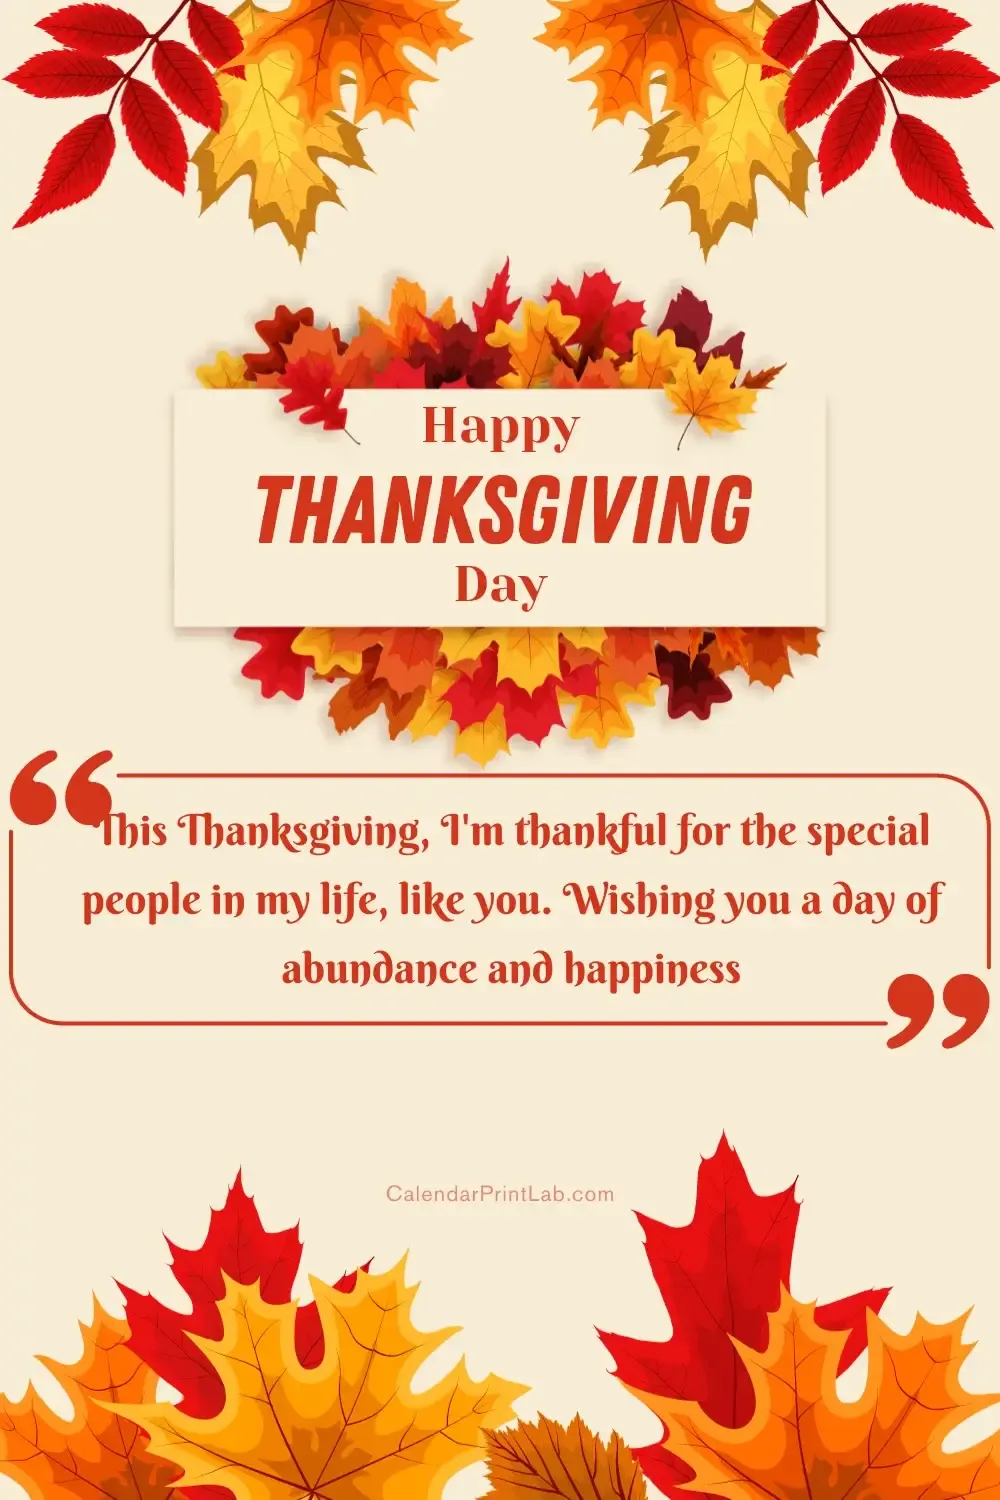 happy thanksgiving day wishes